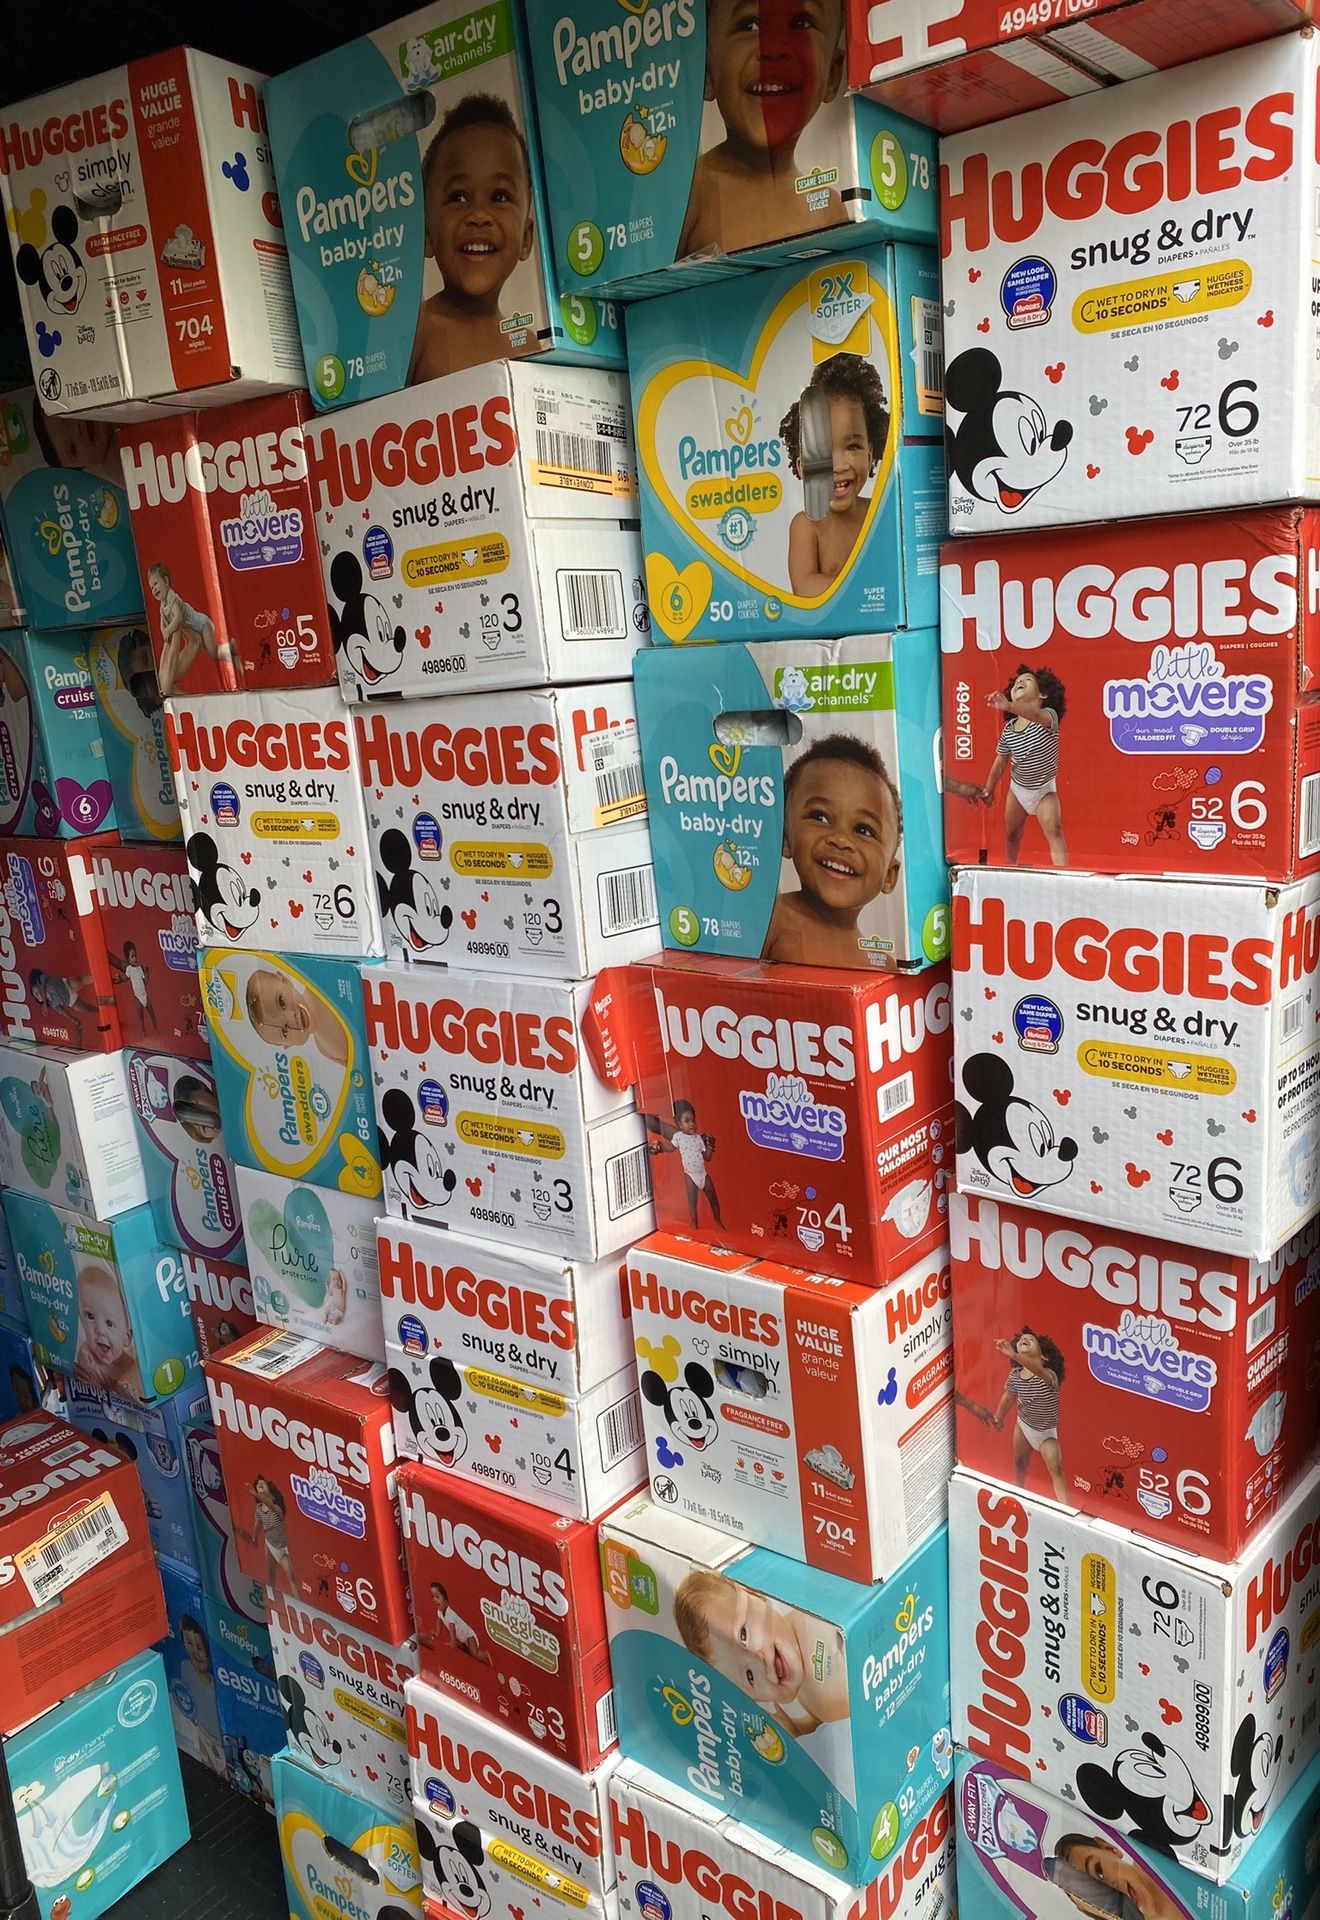 Huggies snug and dry, huggies little movers, pampers baby dry, pampers swaddlers for SALE